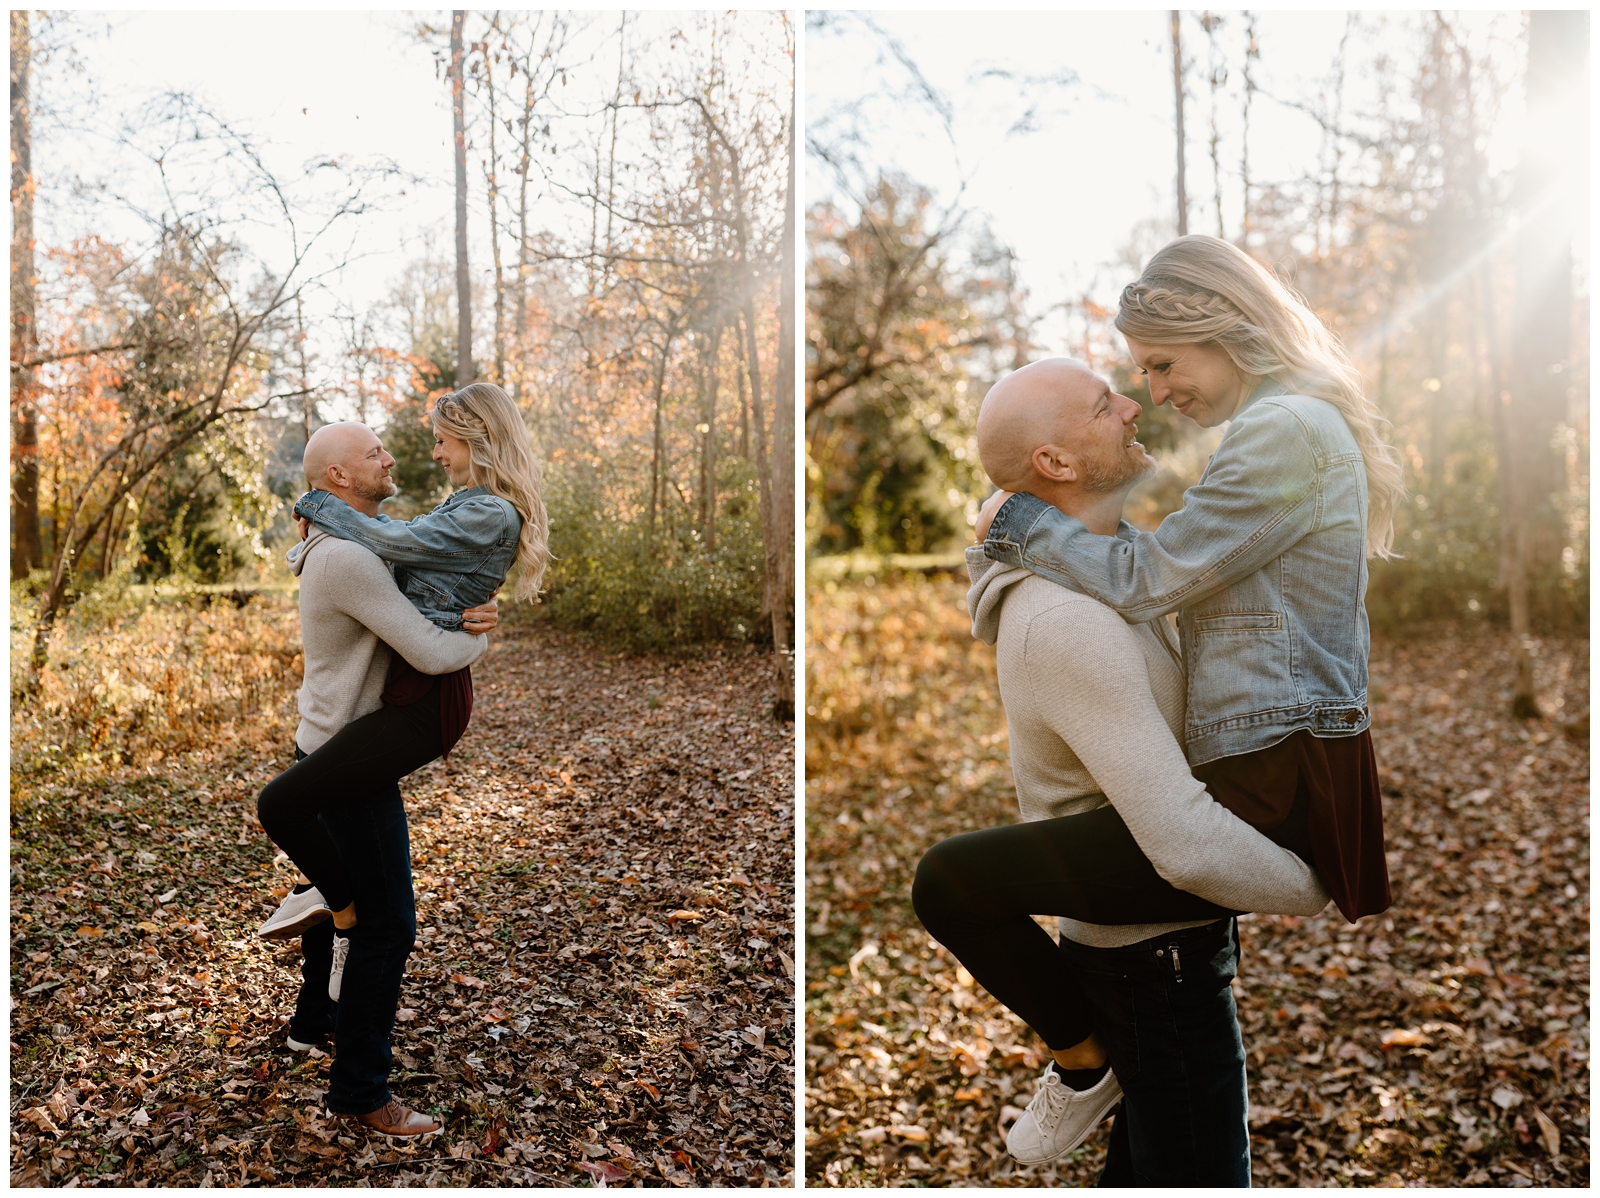 Fun cozy shots at carefree engagement session in Greensboro, NC by North Carolina wedding photographer